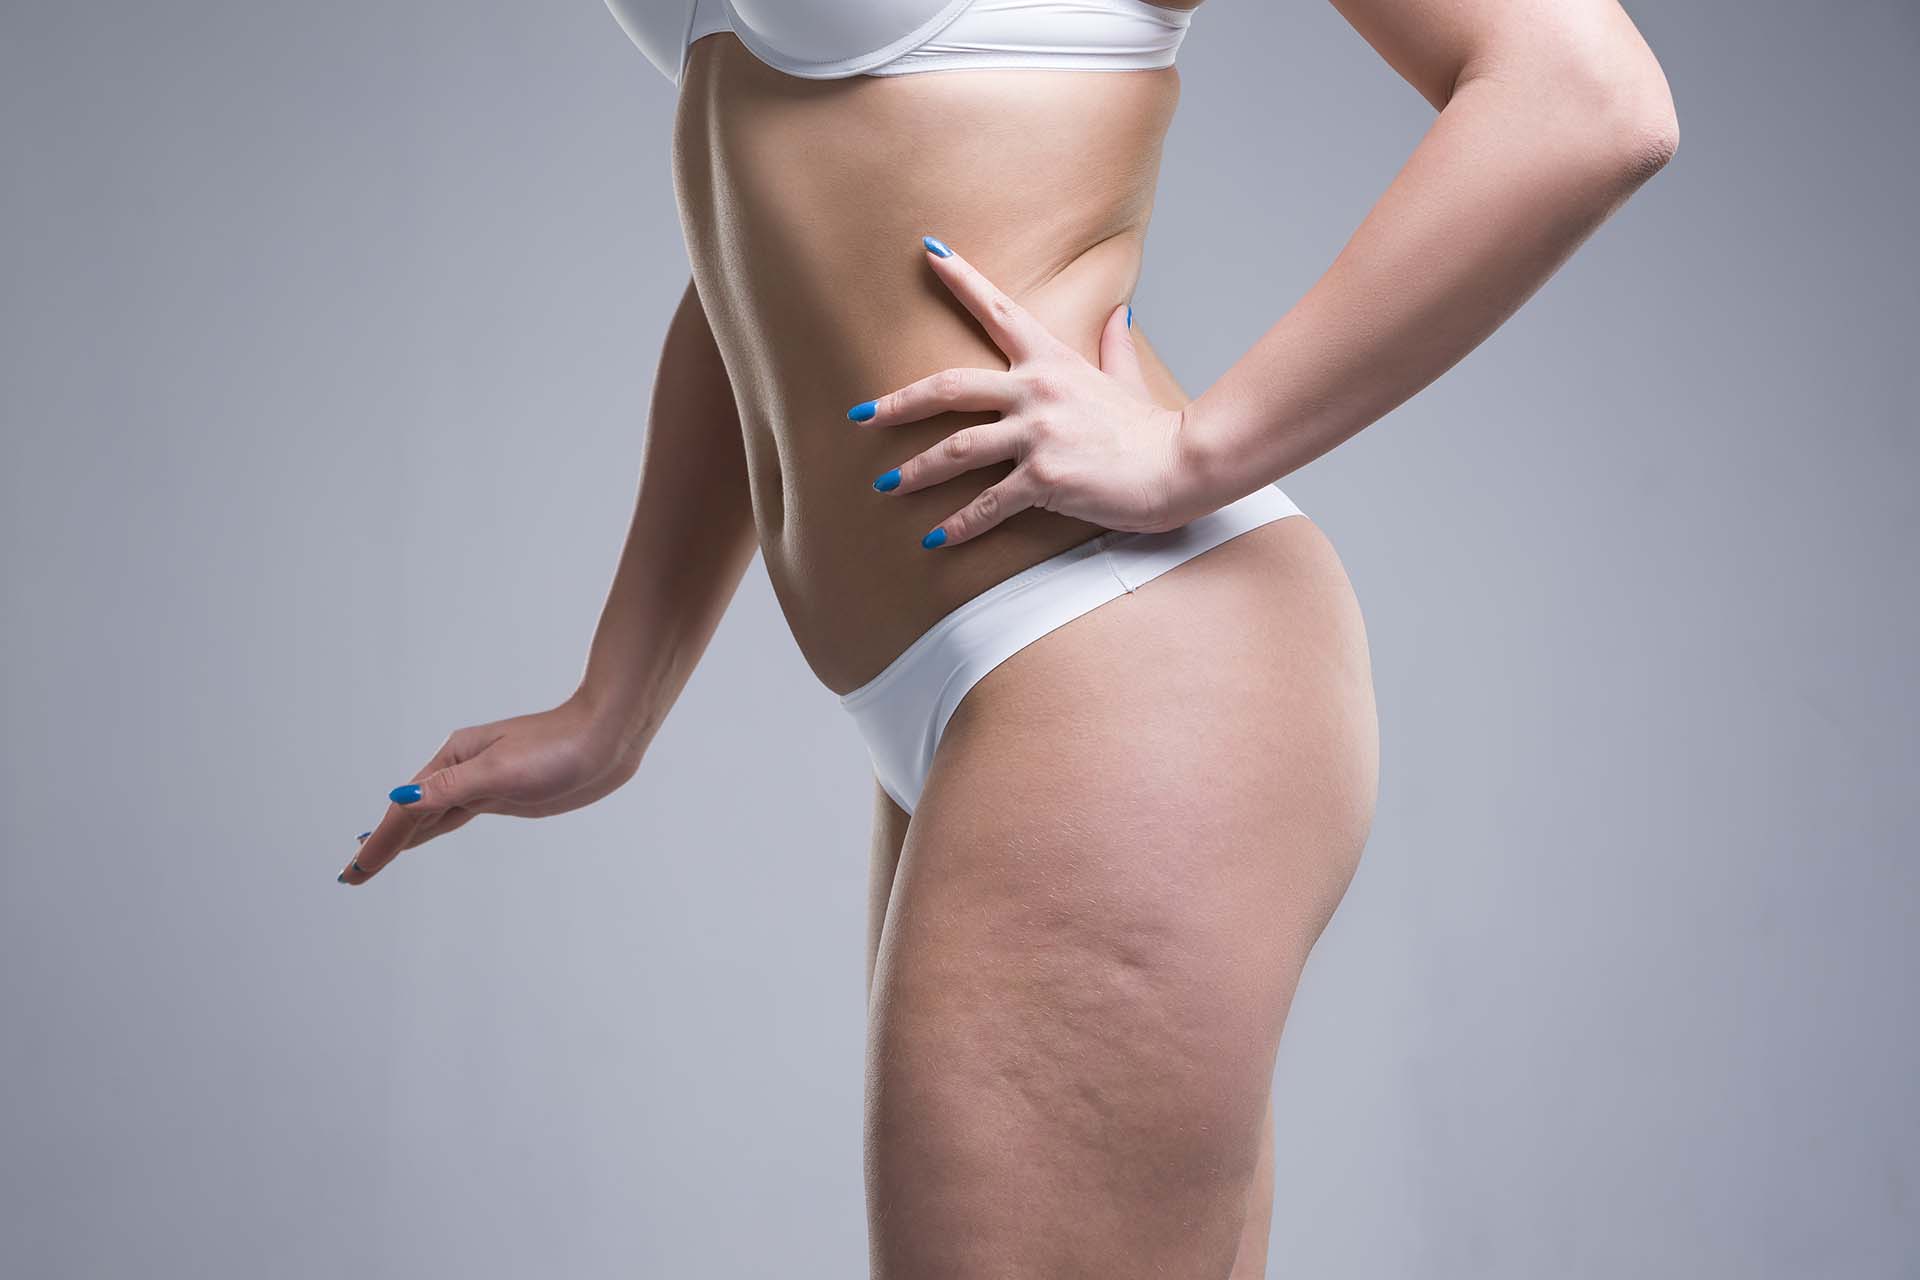 What Are The Most Effective Nonsurgical Methods for Reducing Cellulite?